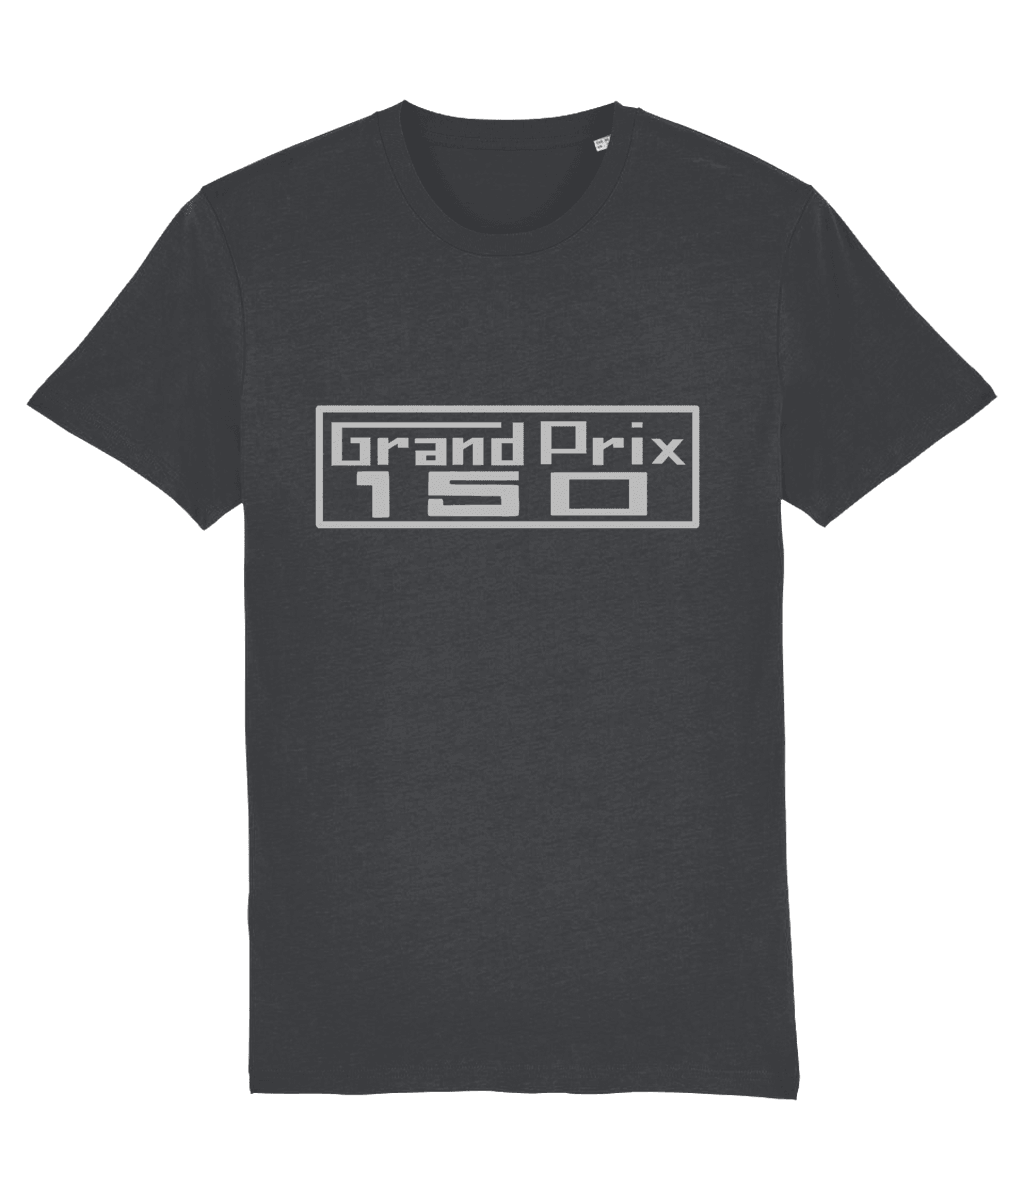 GRAND PRIX 150 T-Shirt Inspired by Classic Lambretta Scooters (Silver Badge with 3 Colour Options) Small to 4XL - SOUND IS COLOUR